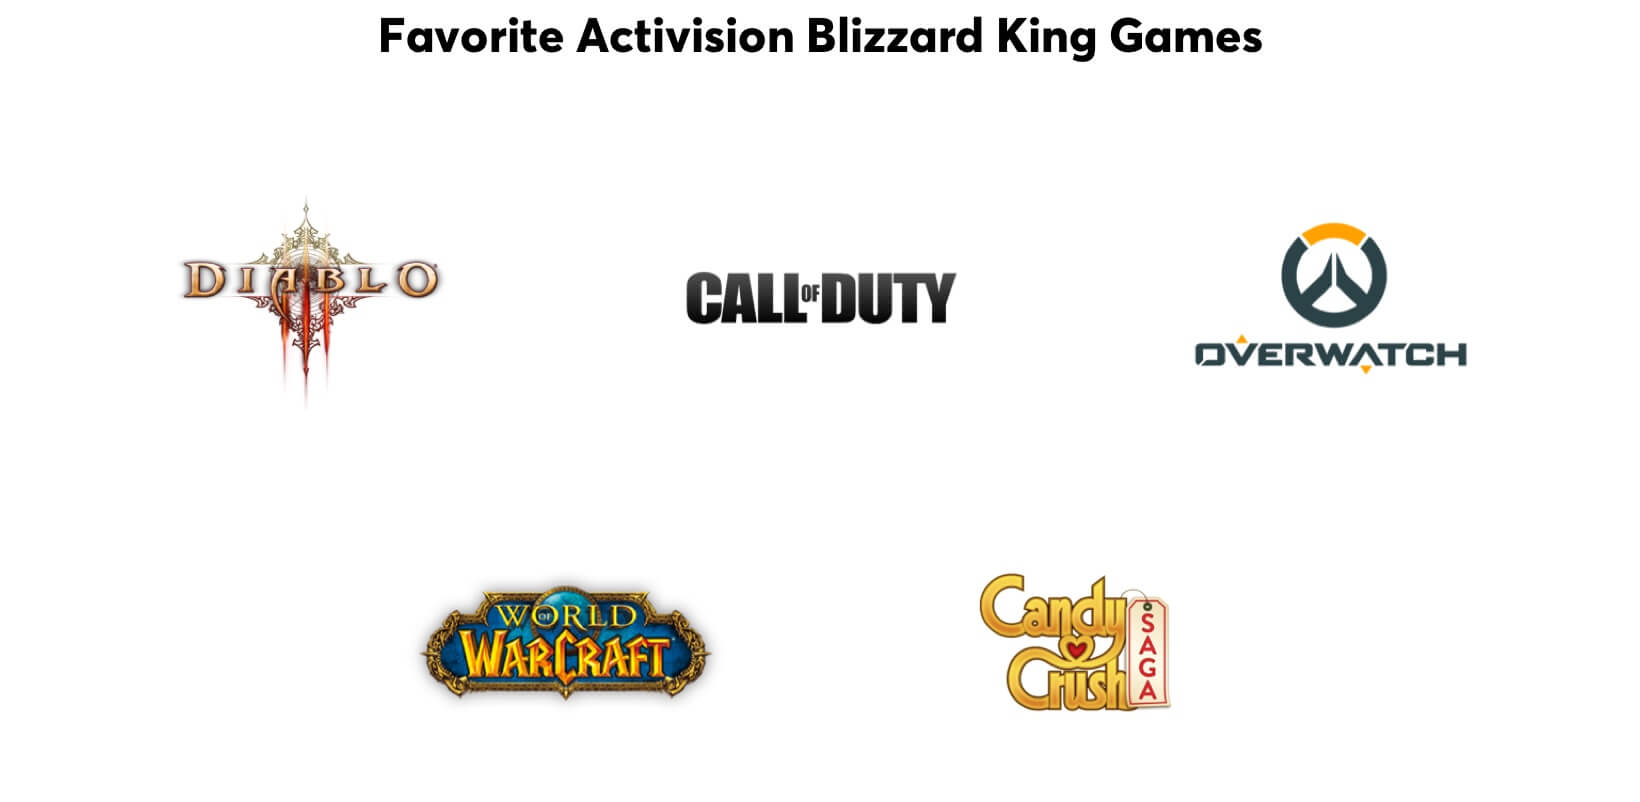 Next Levelers Favorite Games: Diablo, Call of Duty, Overwatch, World of WarCraft, Candy Crush